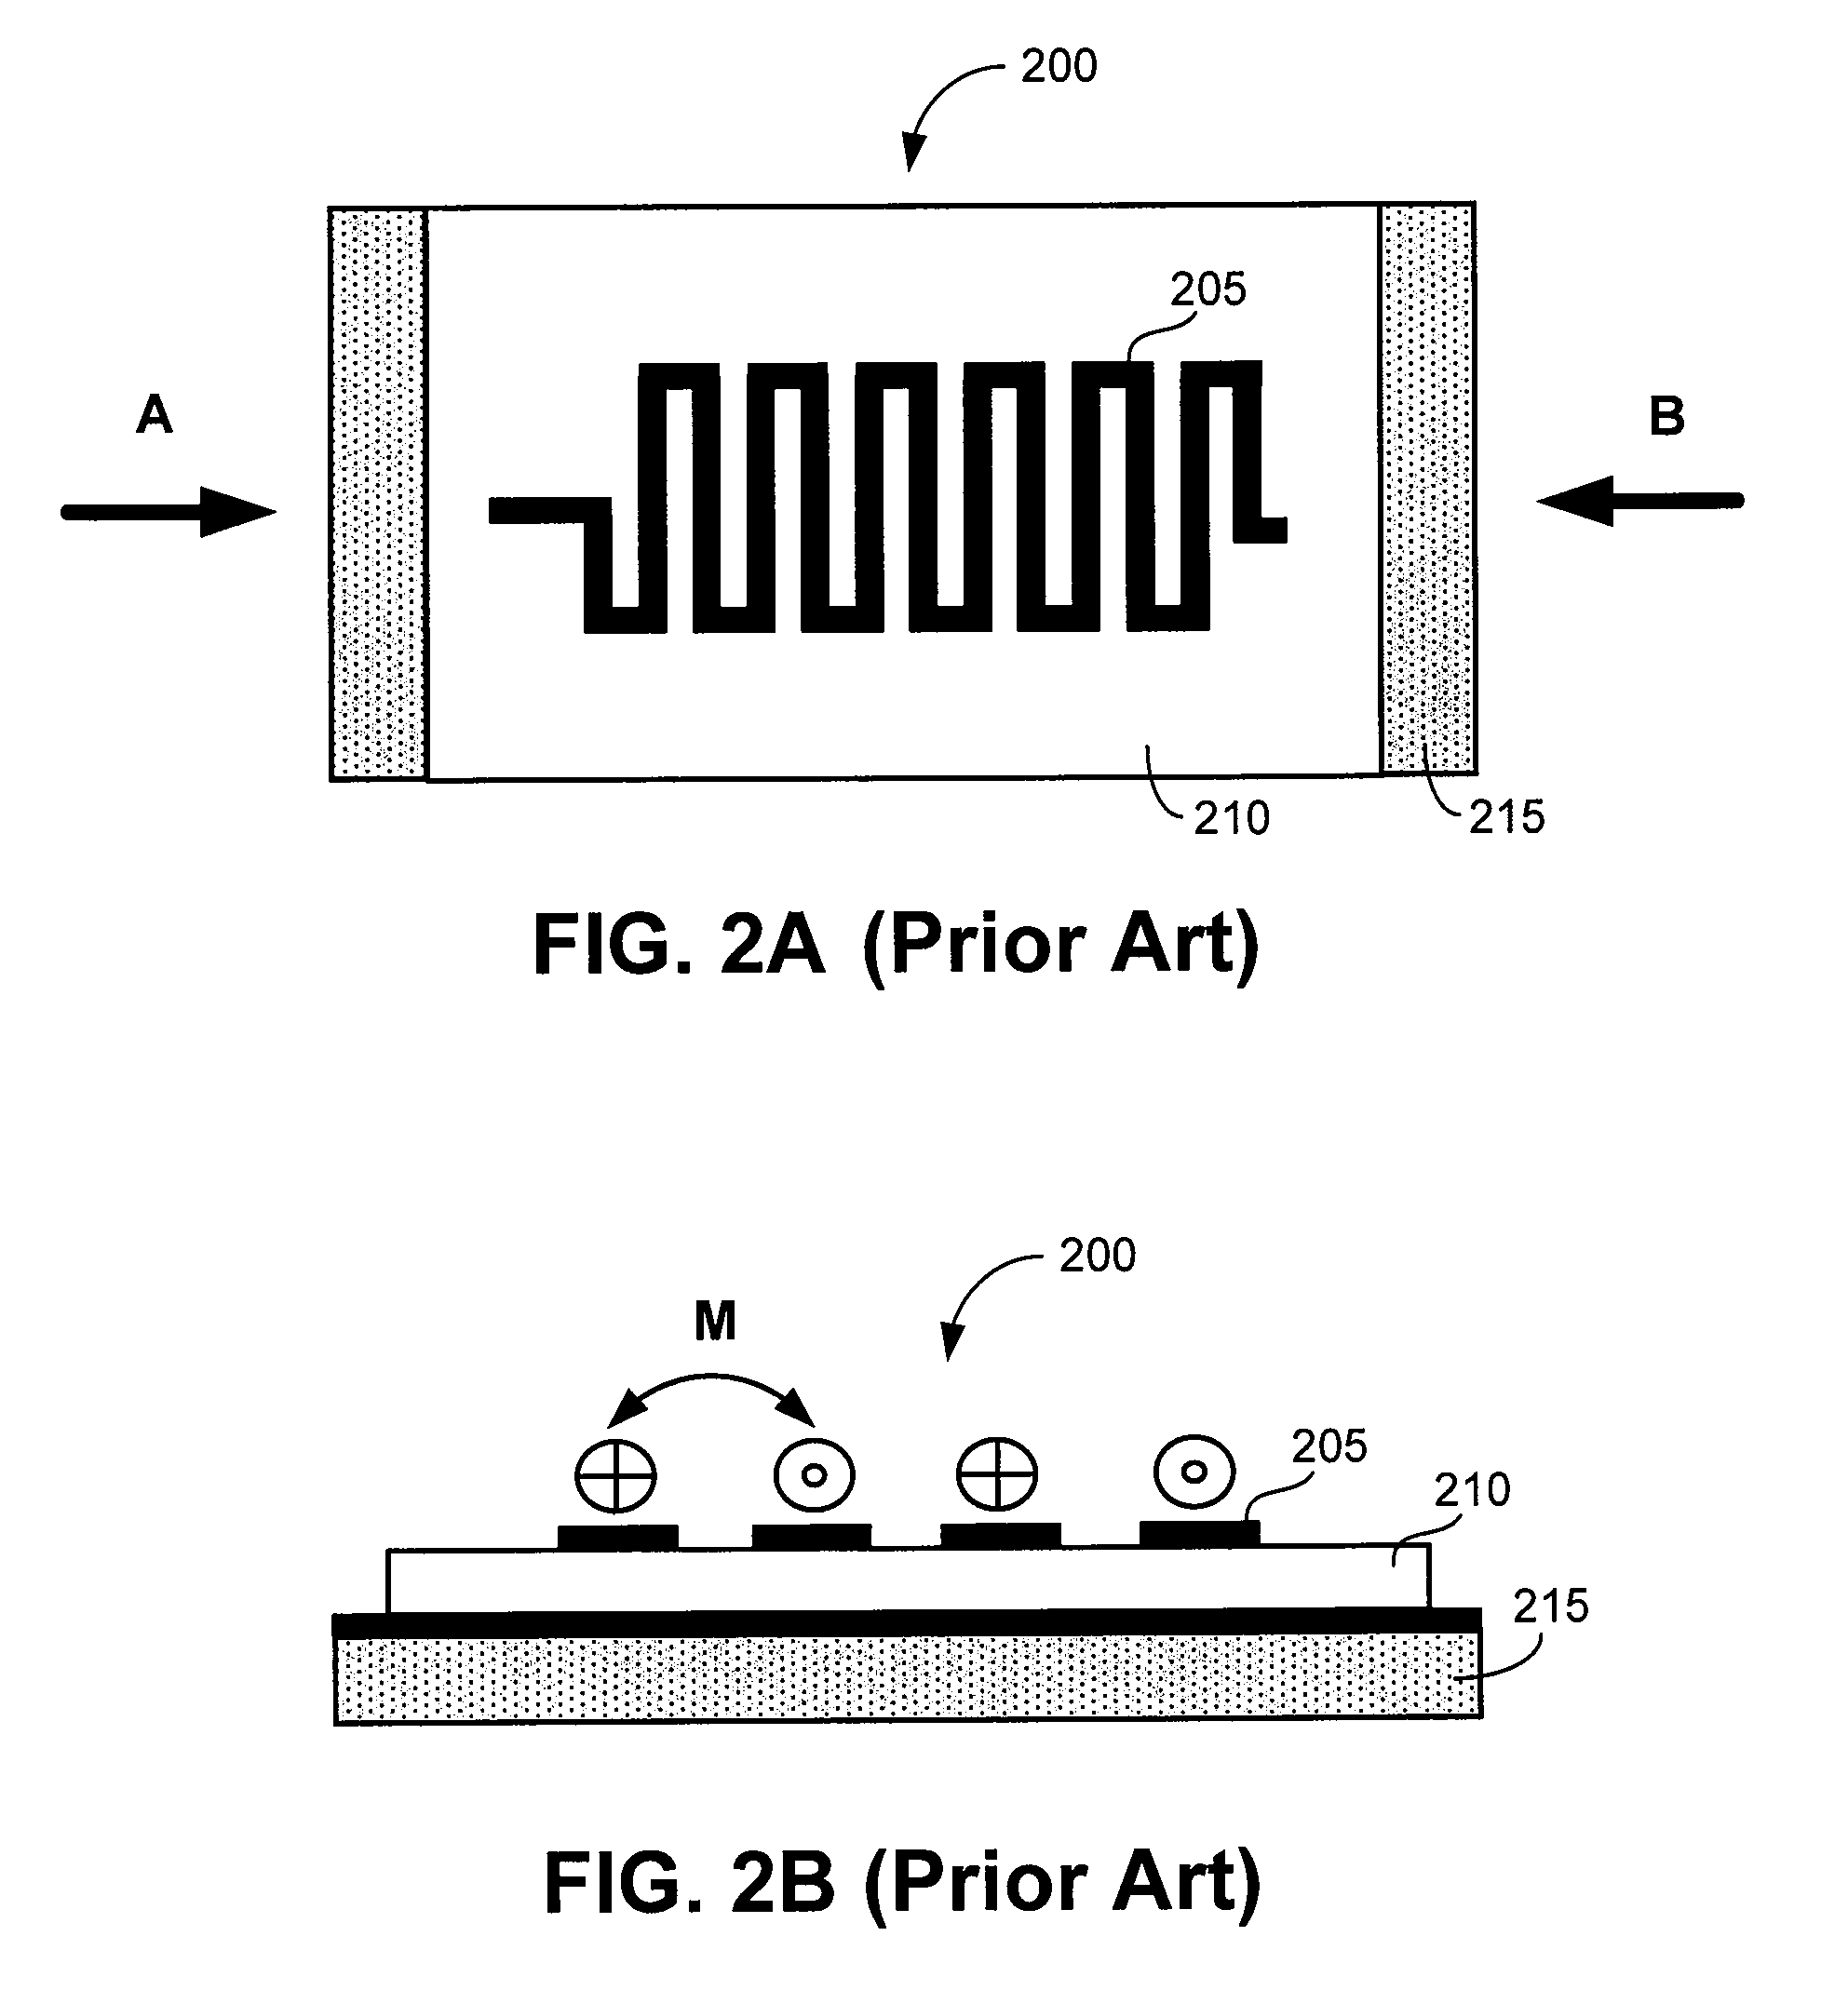 High-power PIN diode switch